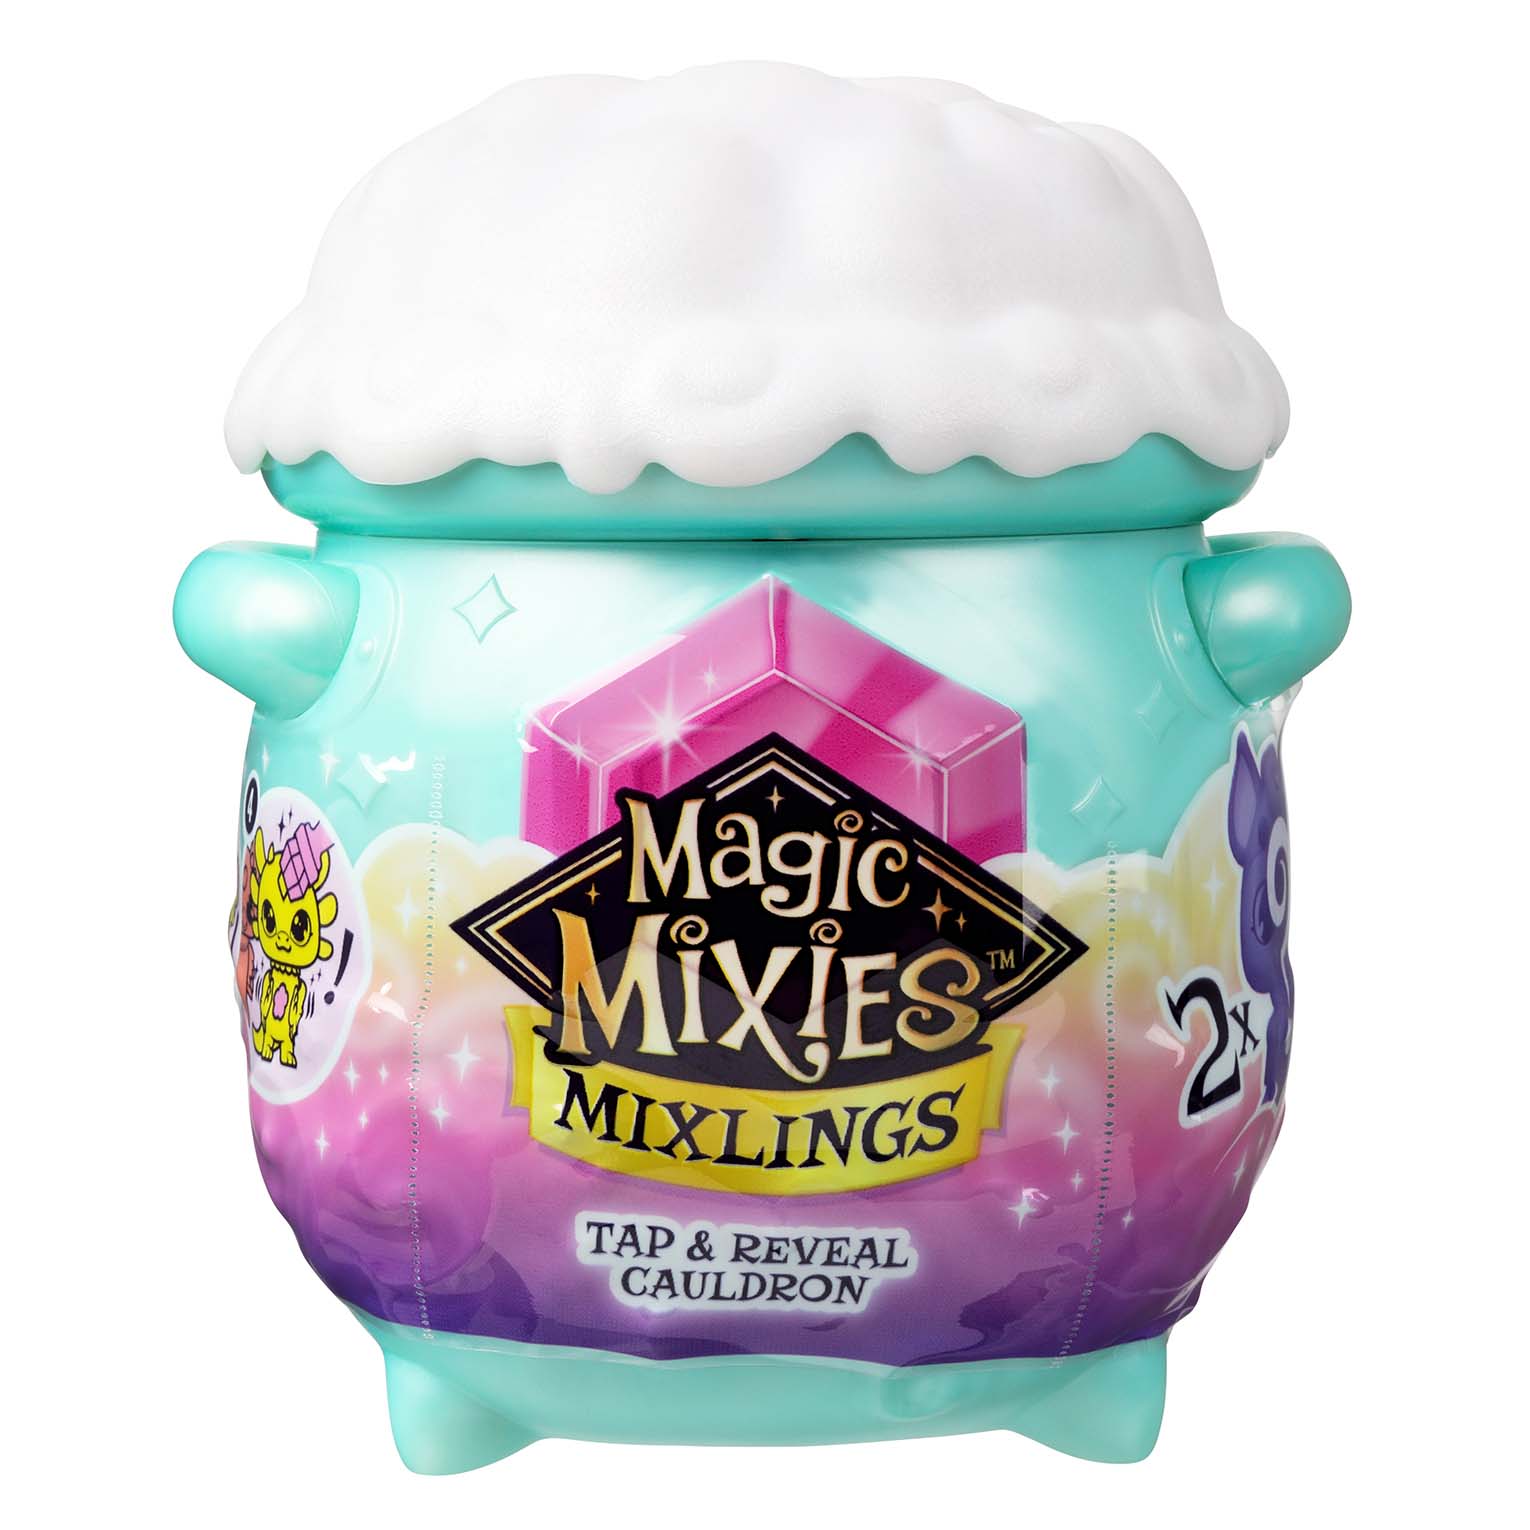 Magic Mixies Mixlings – Tap & Discover Kettle (Duo-Pack)